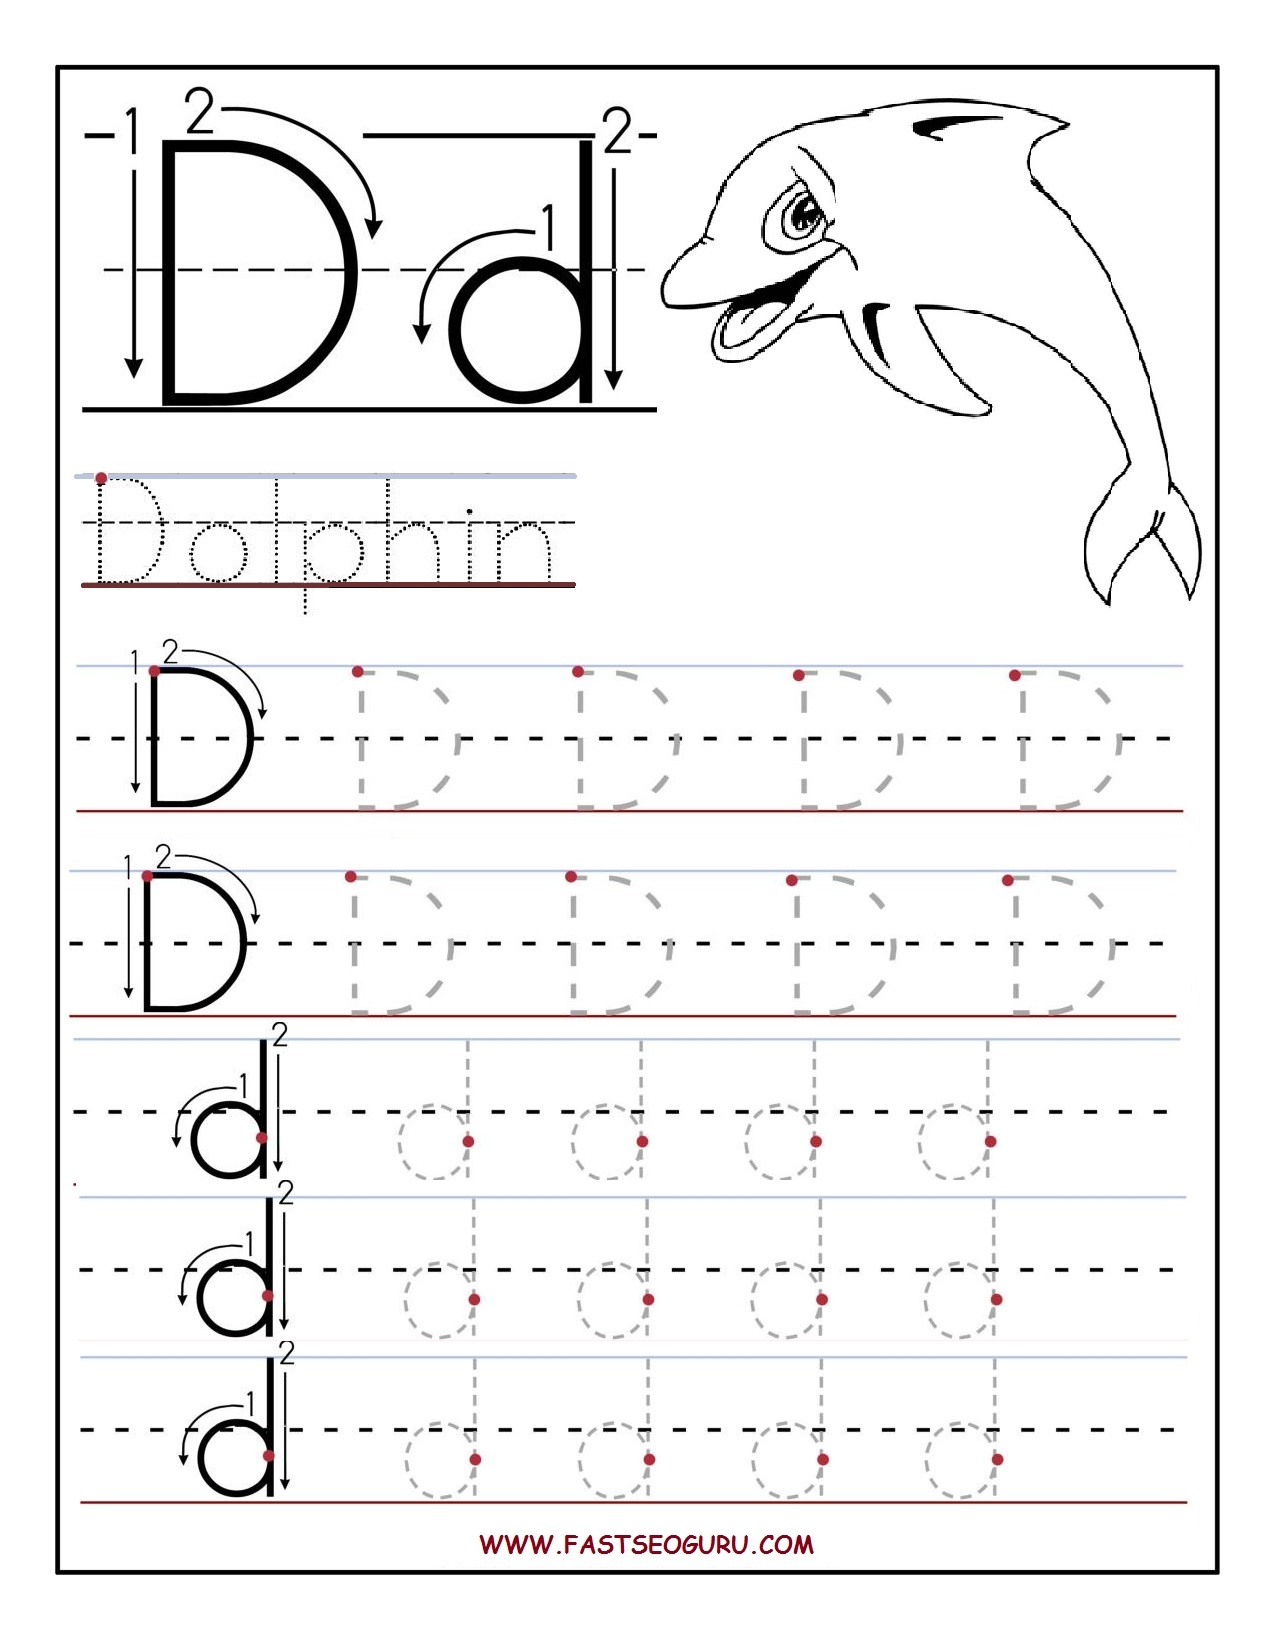 Free Letter D Tracing Worksheets